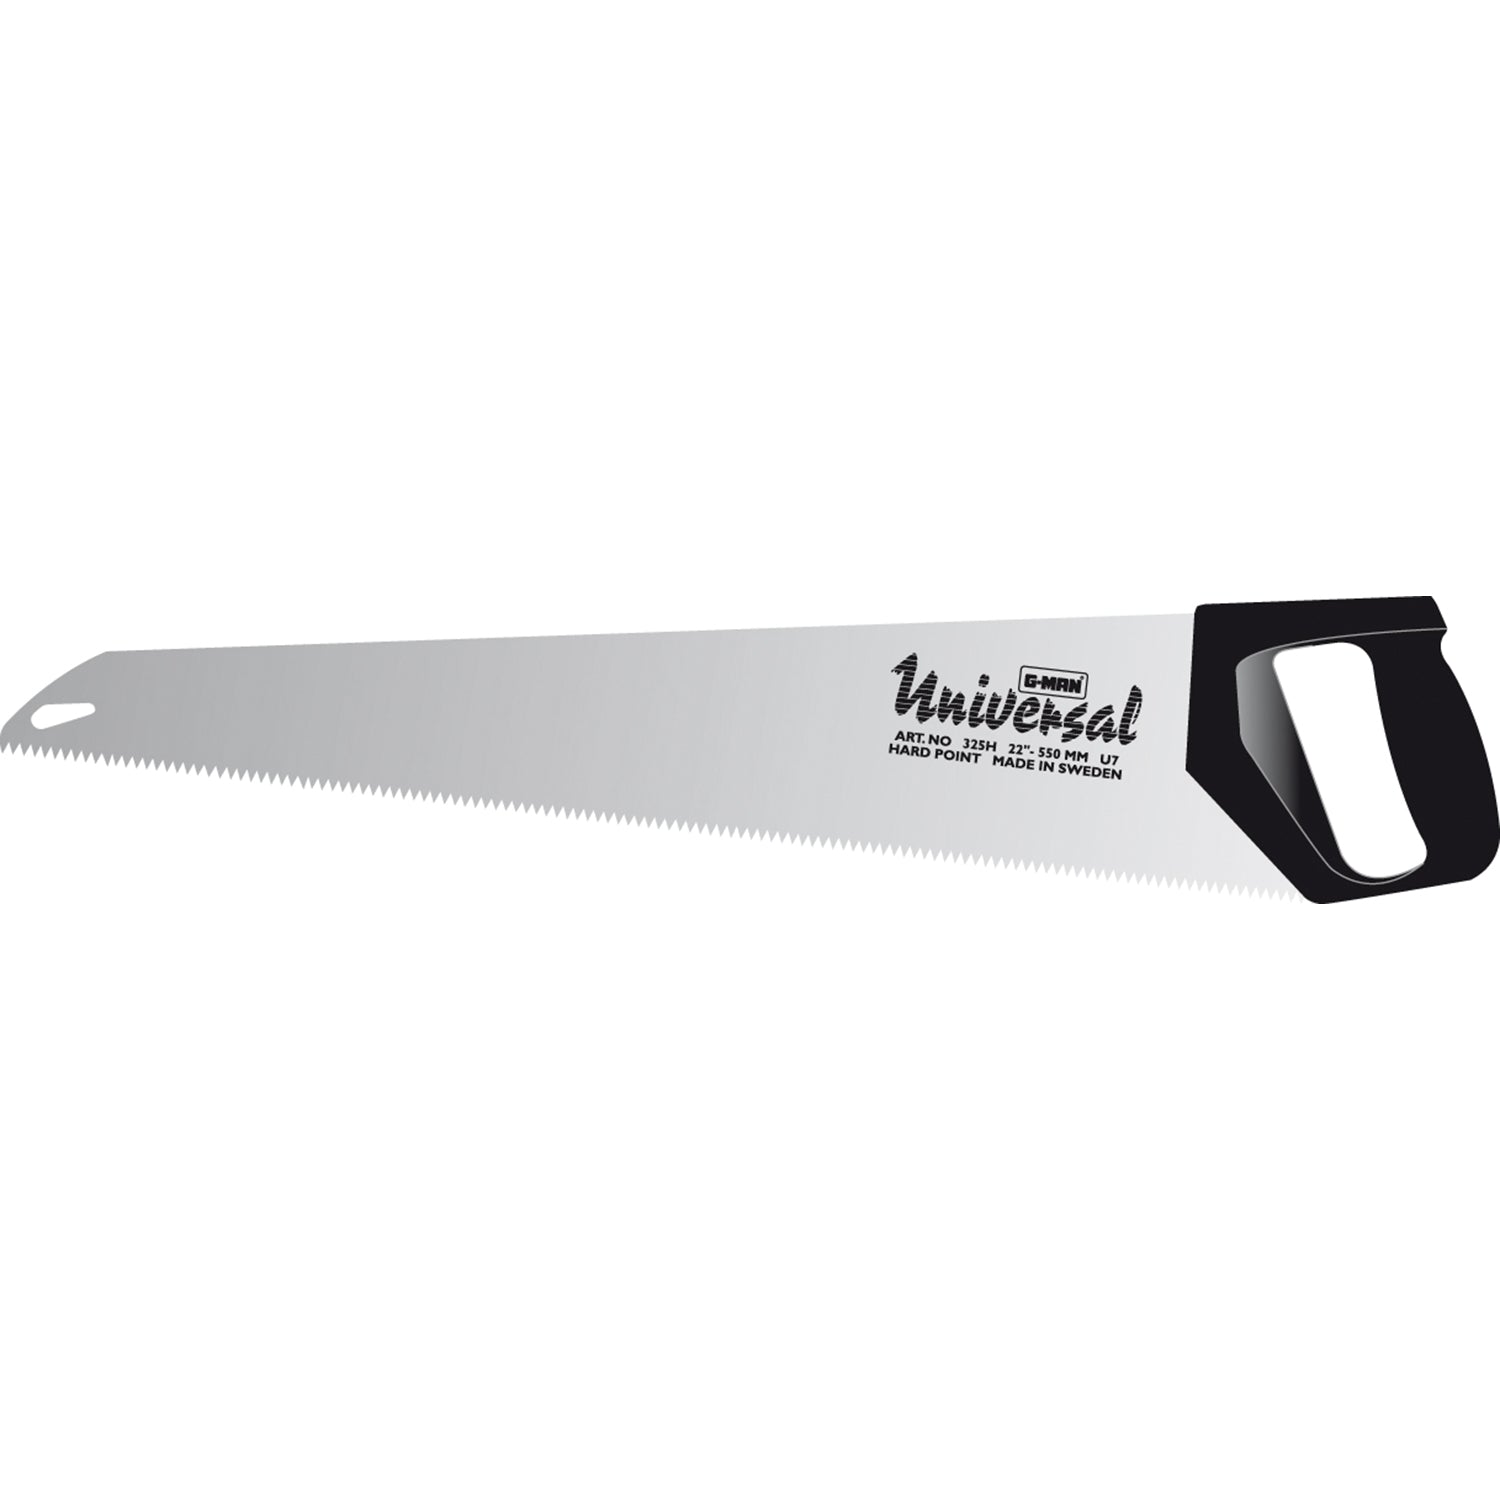 G-Man 22" Handsaw w/ Adjustable Angle Blade Hand Tools - Cleanflow